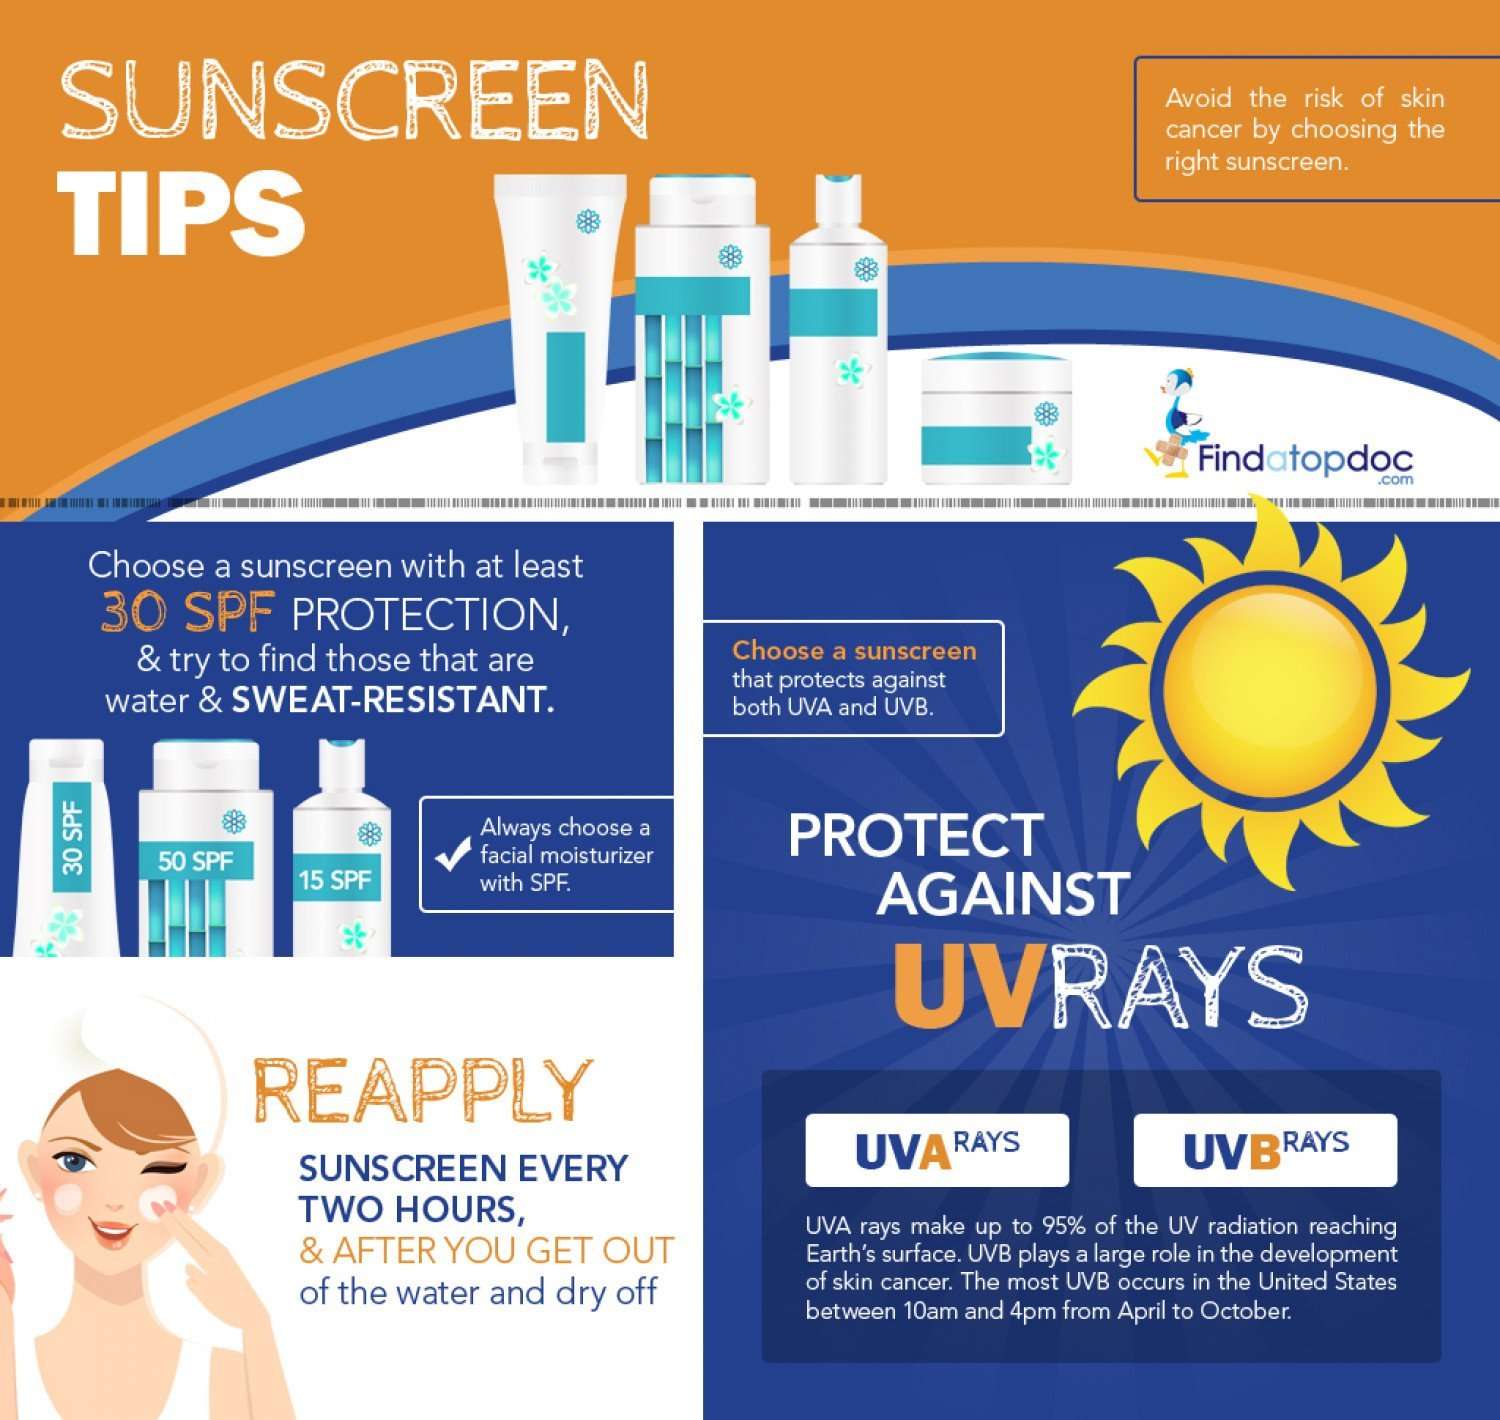 How does Sunscreen Protect Your Skin from UV Rays